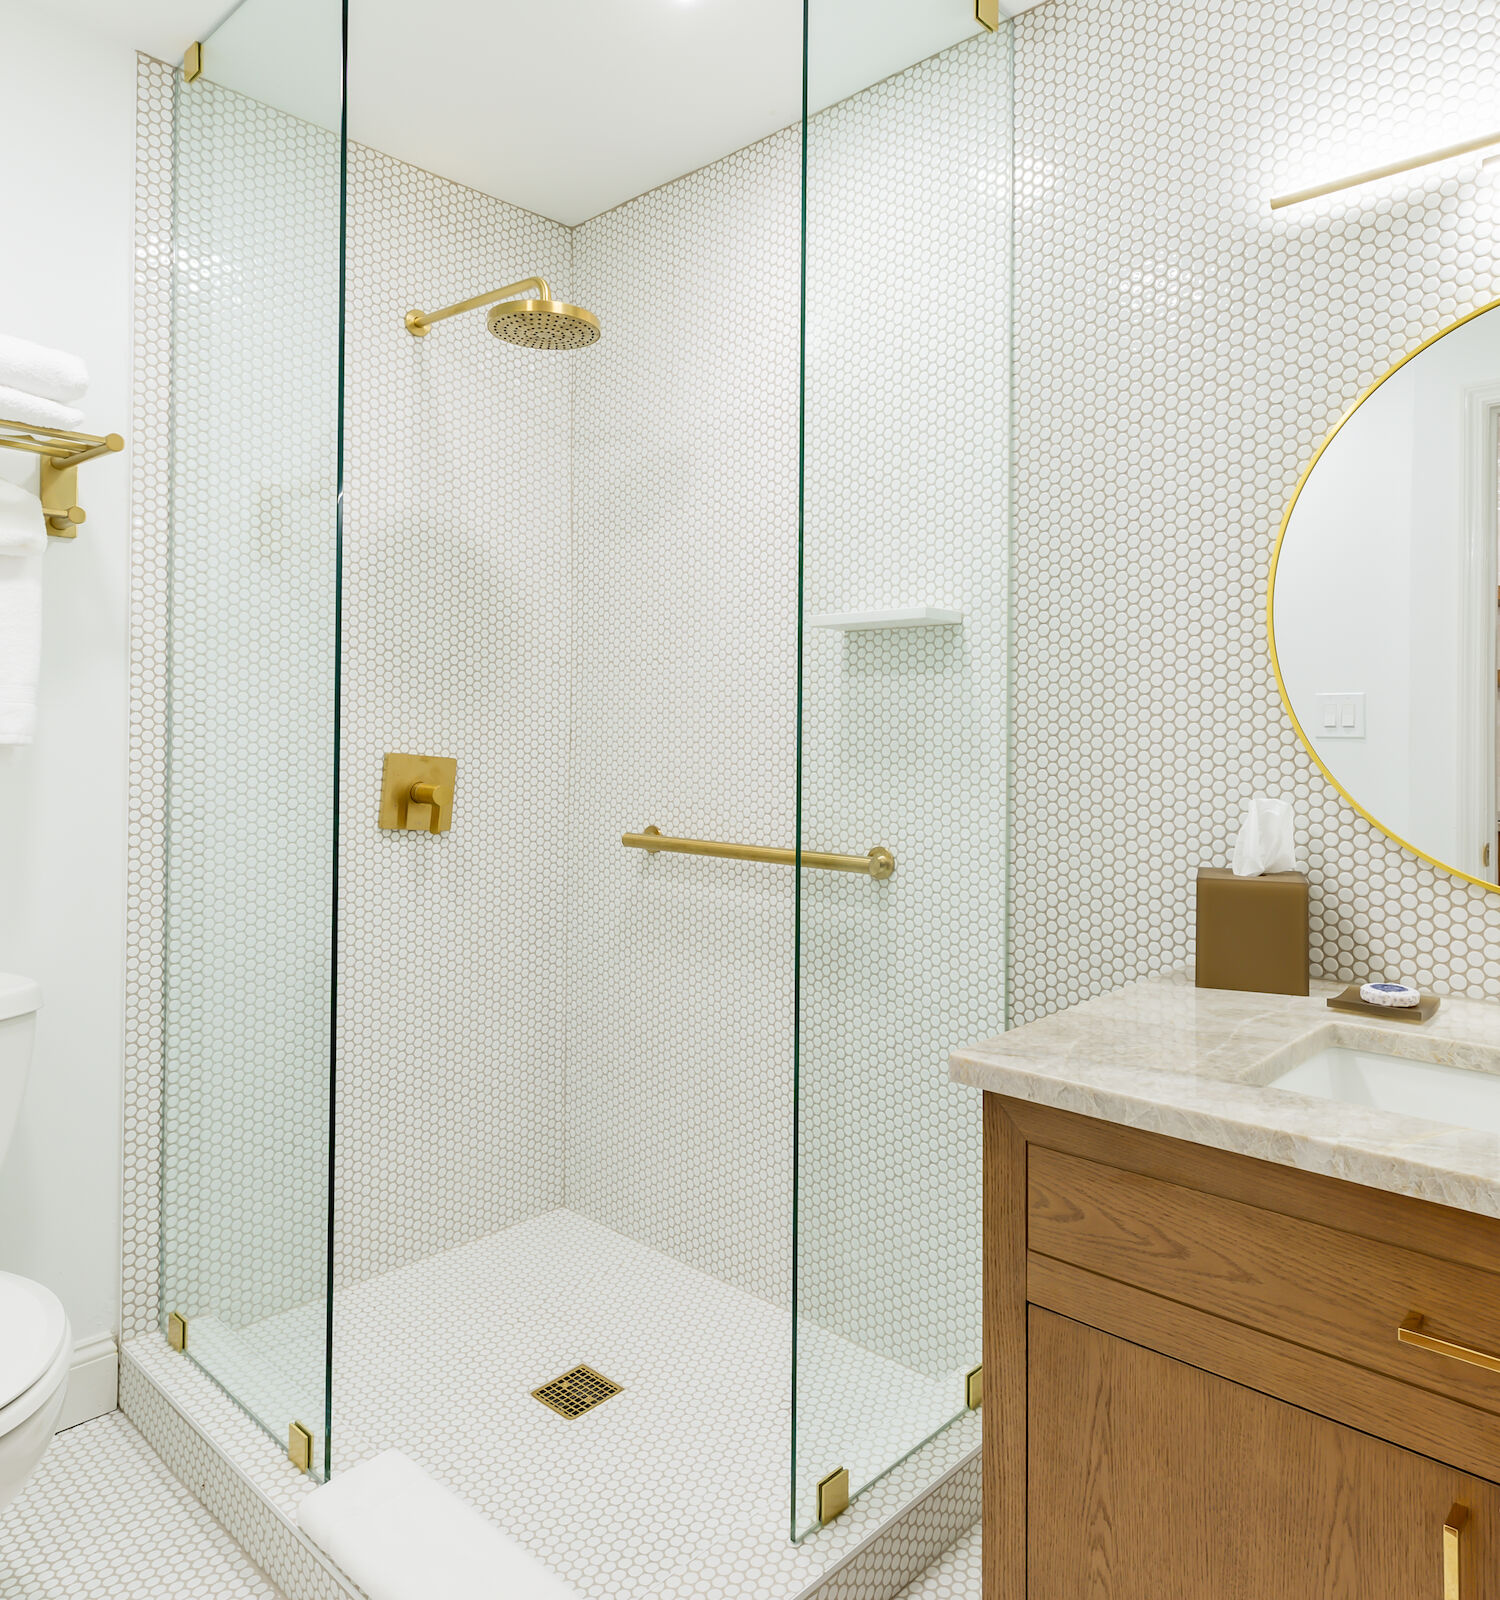 A modern bathroom with a glass shower, gold accents, a round mirror, a toilet, and a wooden vanity with a light countertop.